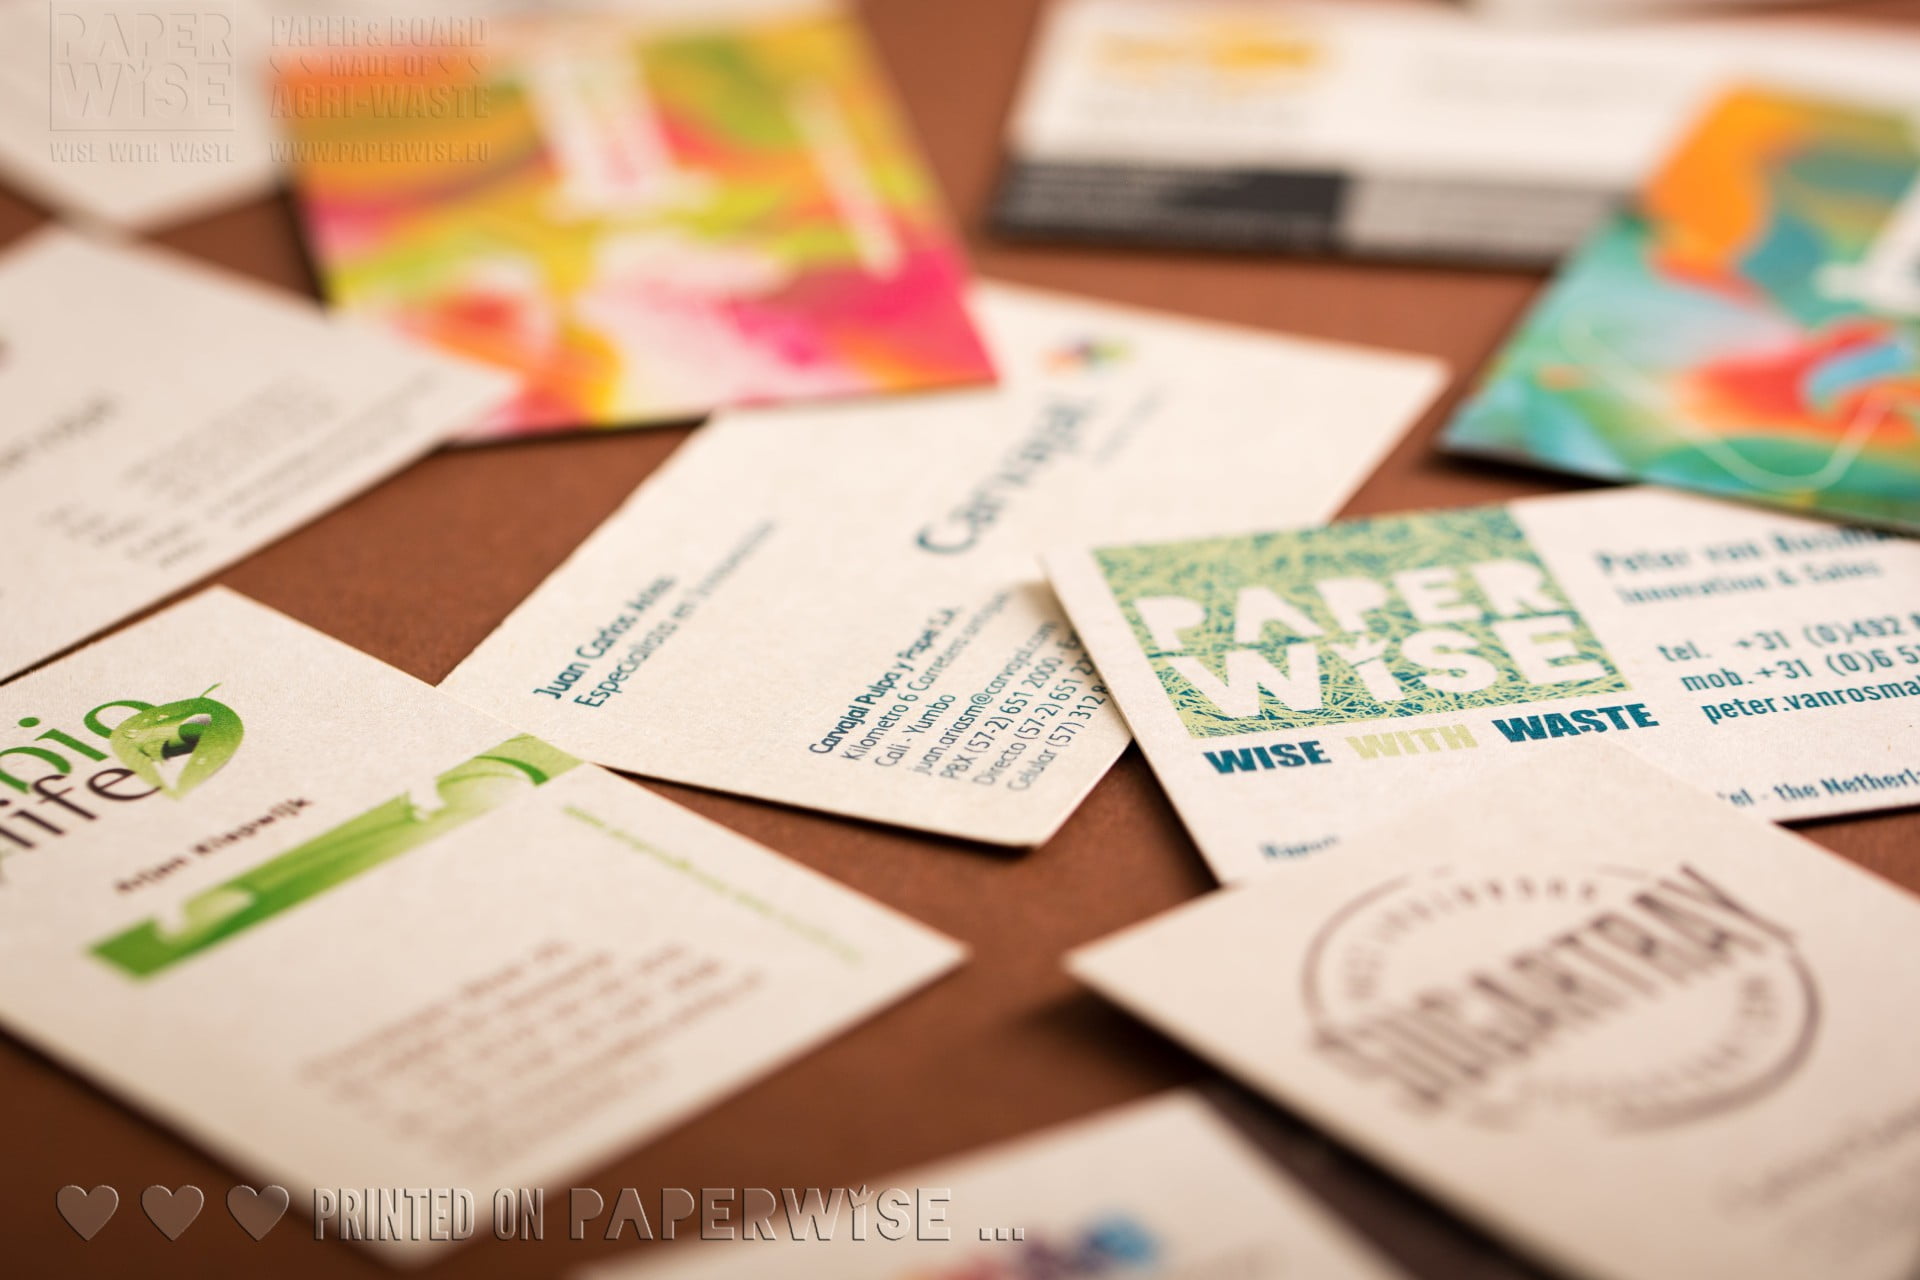 PaperWise eco sustainable paper board printing business cards office promo printingmatters